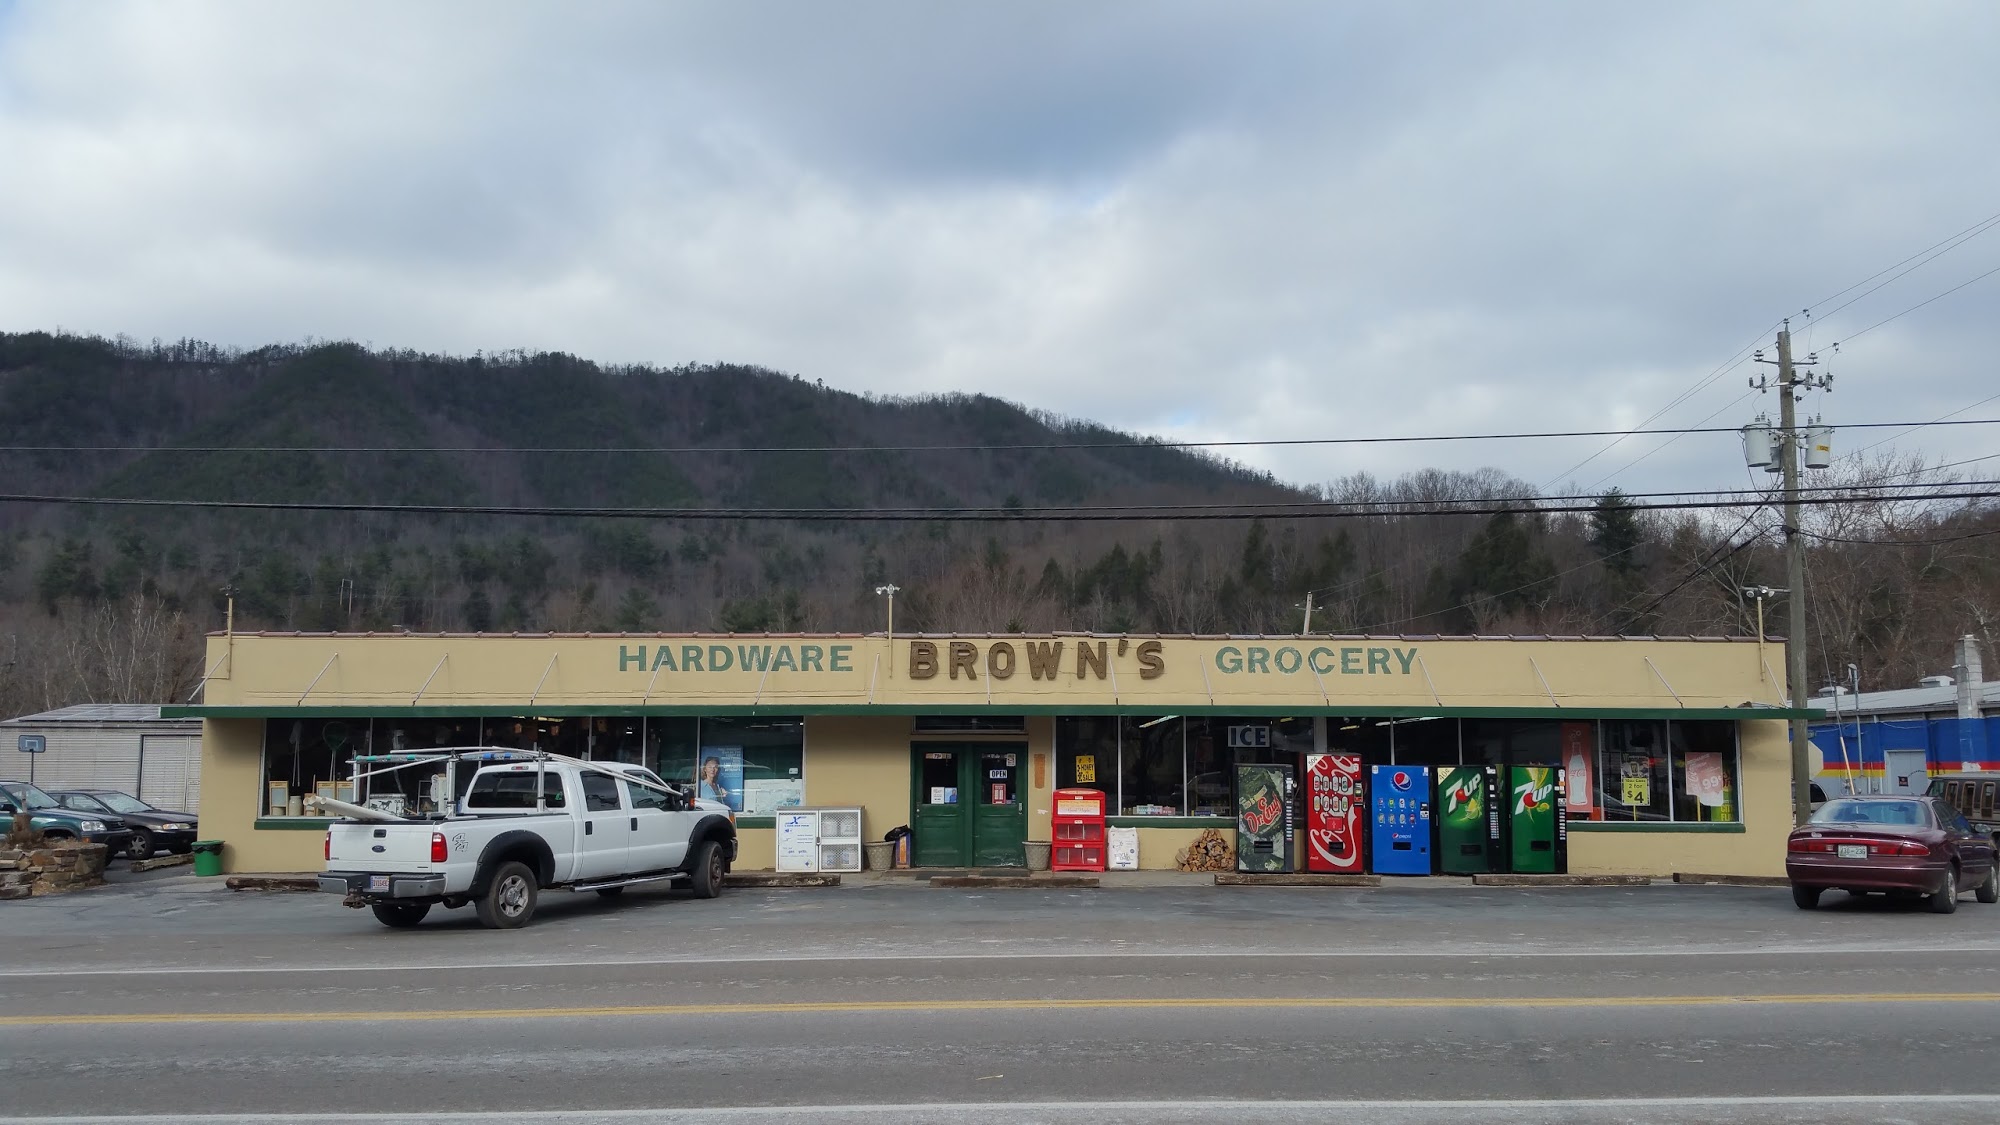 Brown's Grocery & Hardware